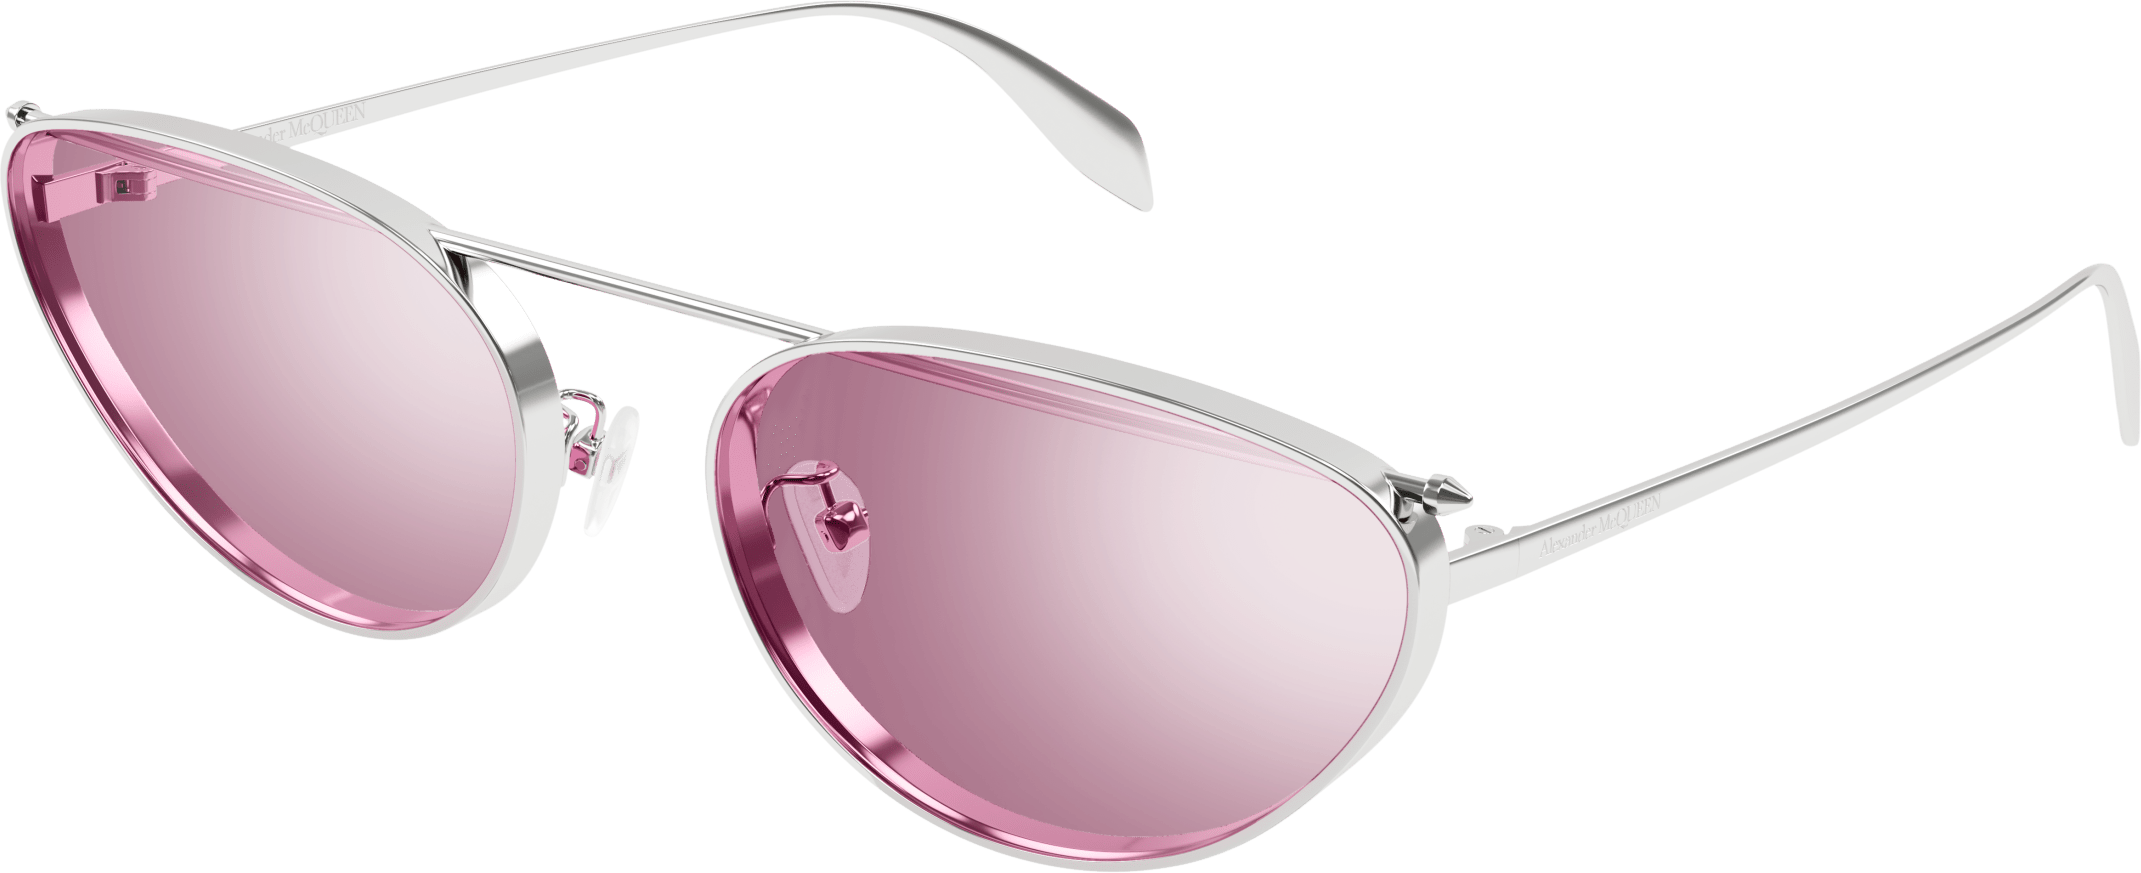 Color_AM0424S-003 - SILVER - PINK - FLASH